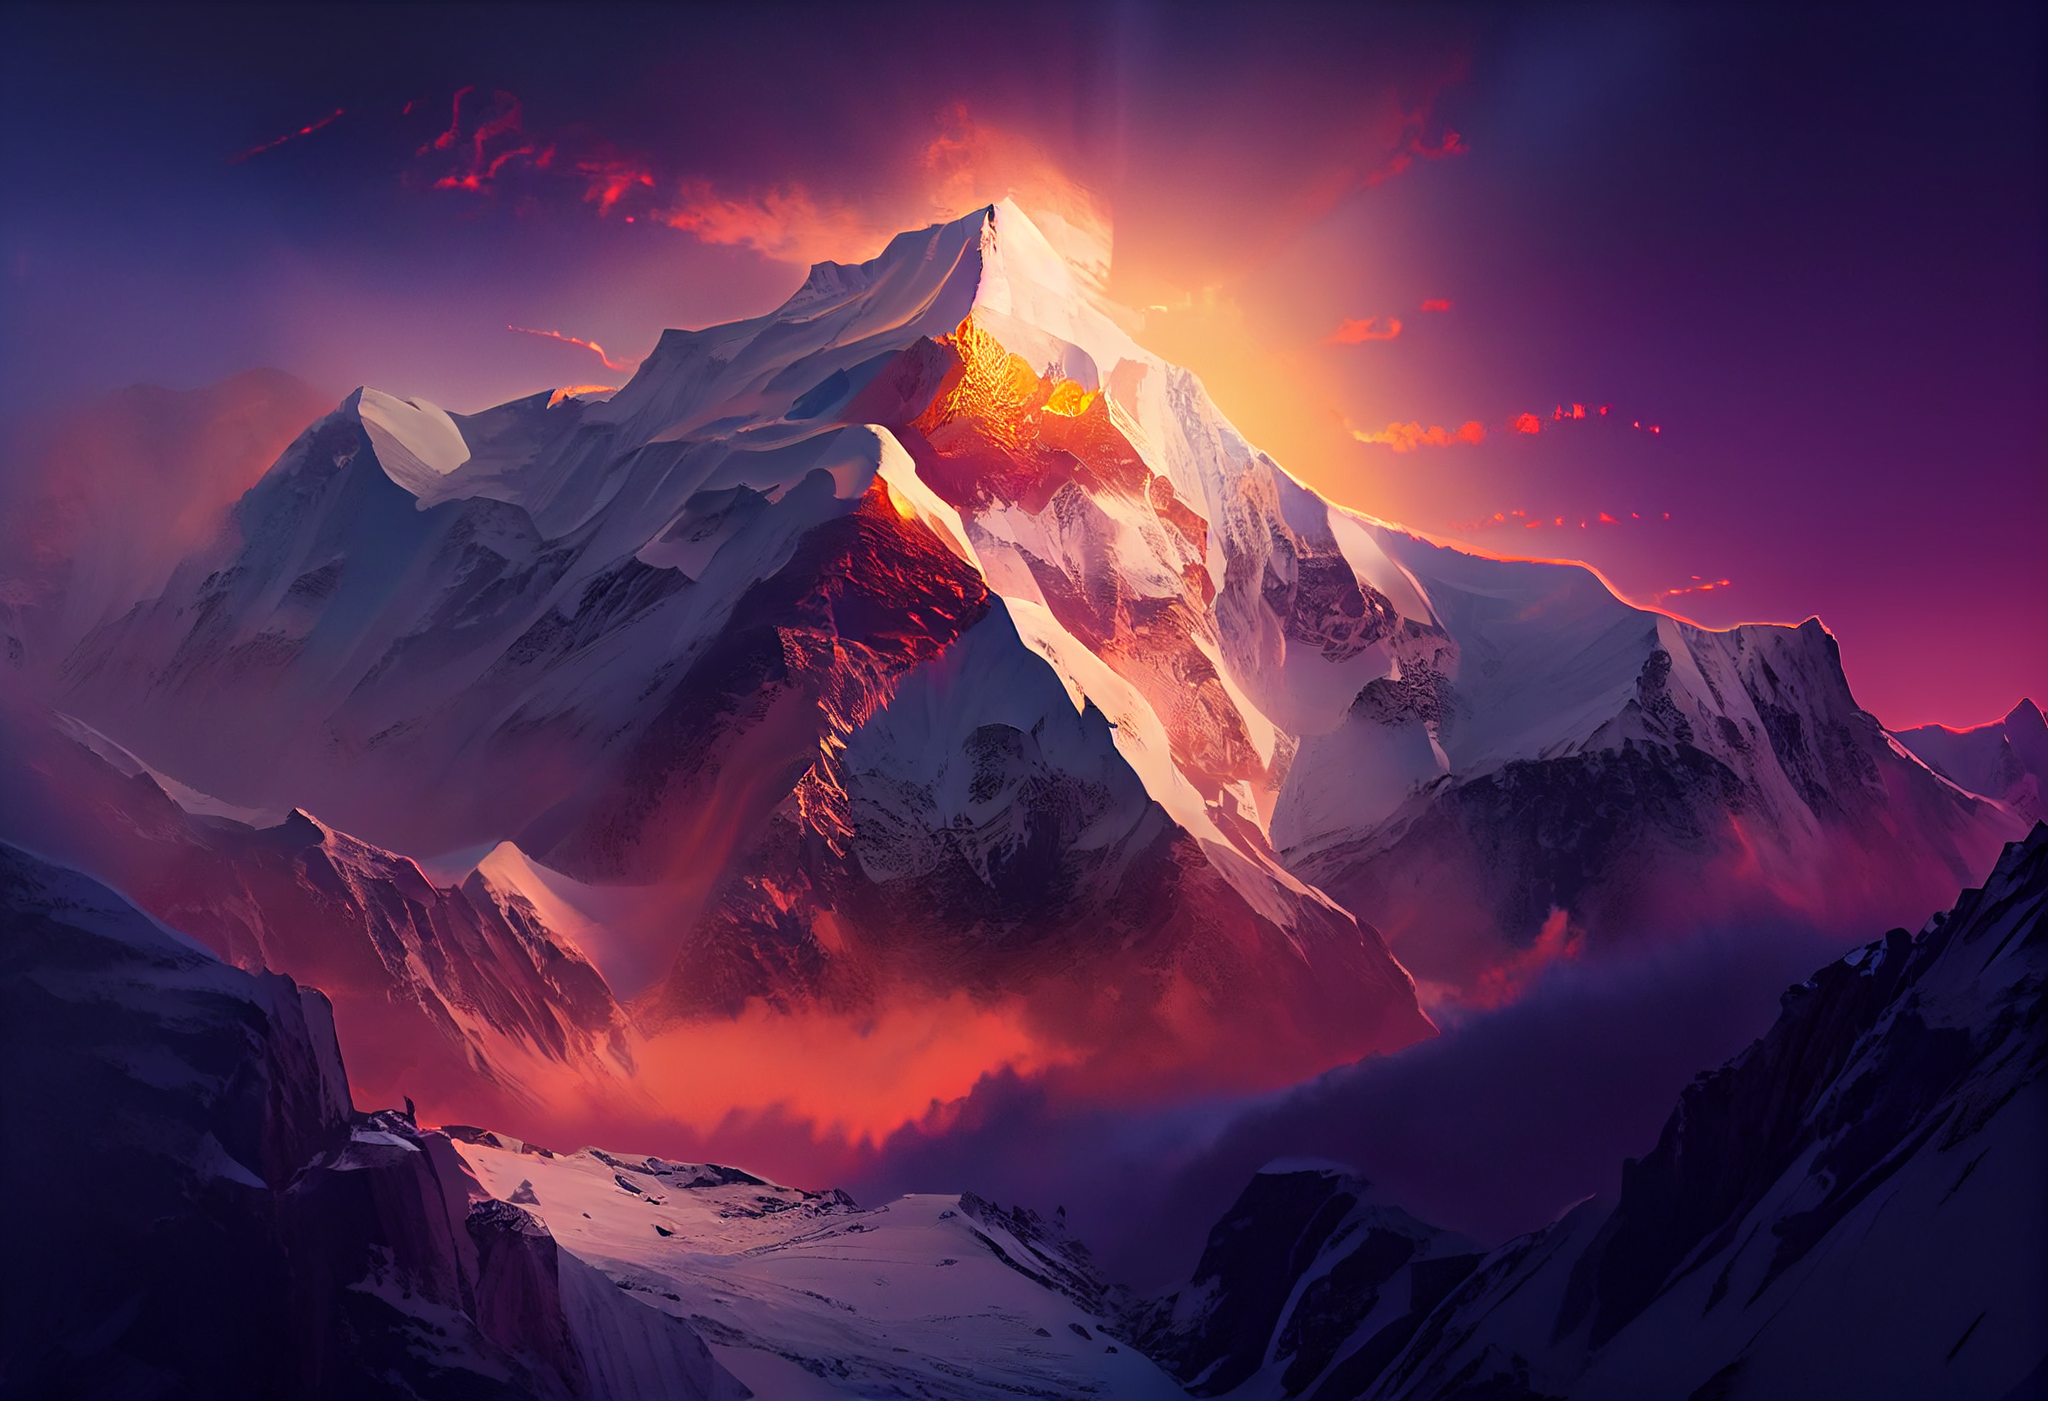 A Dreamy Airbrush Print of Sunrise on Mount Everest with Beautiful Sunbeams Illuminating the Majestic Mountains